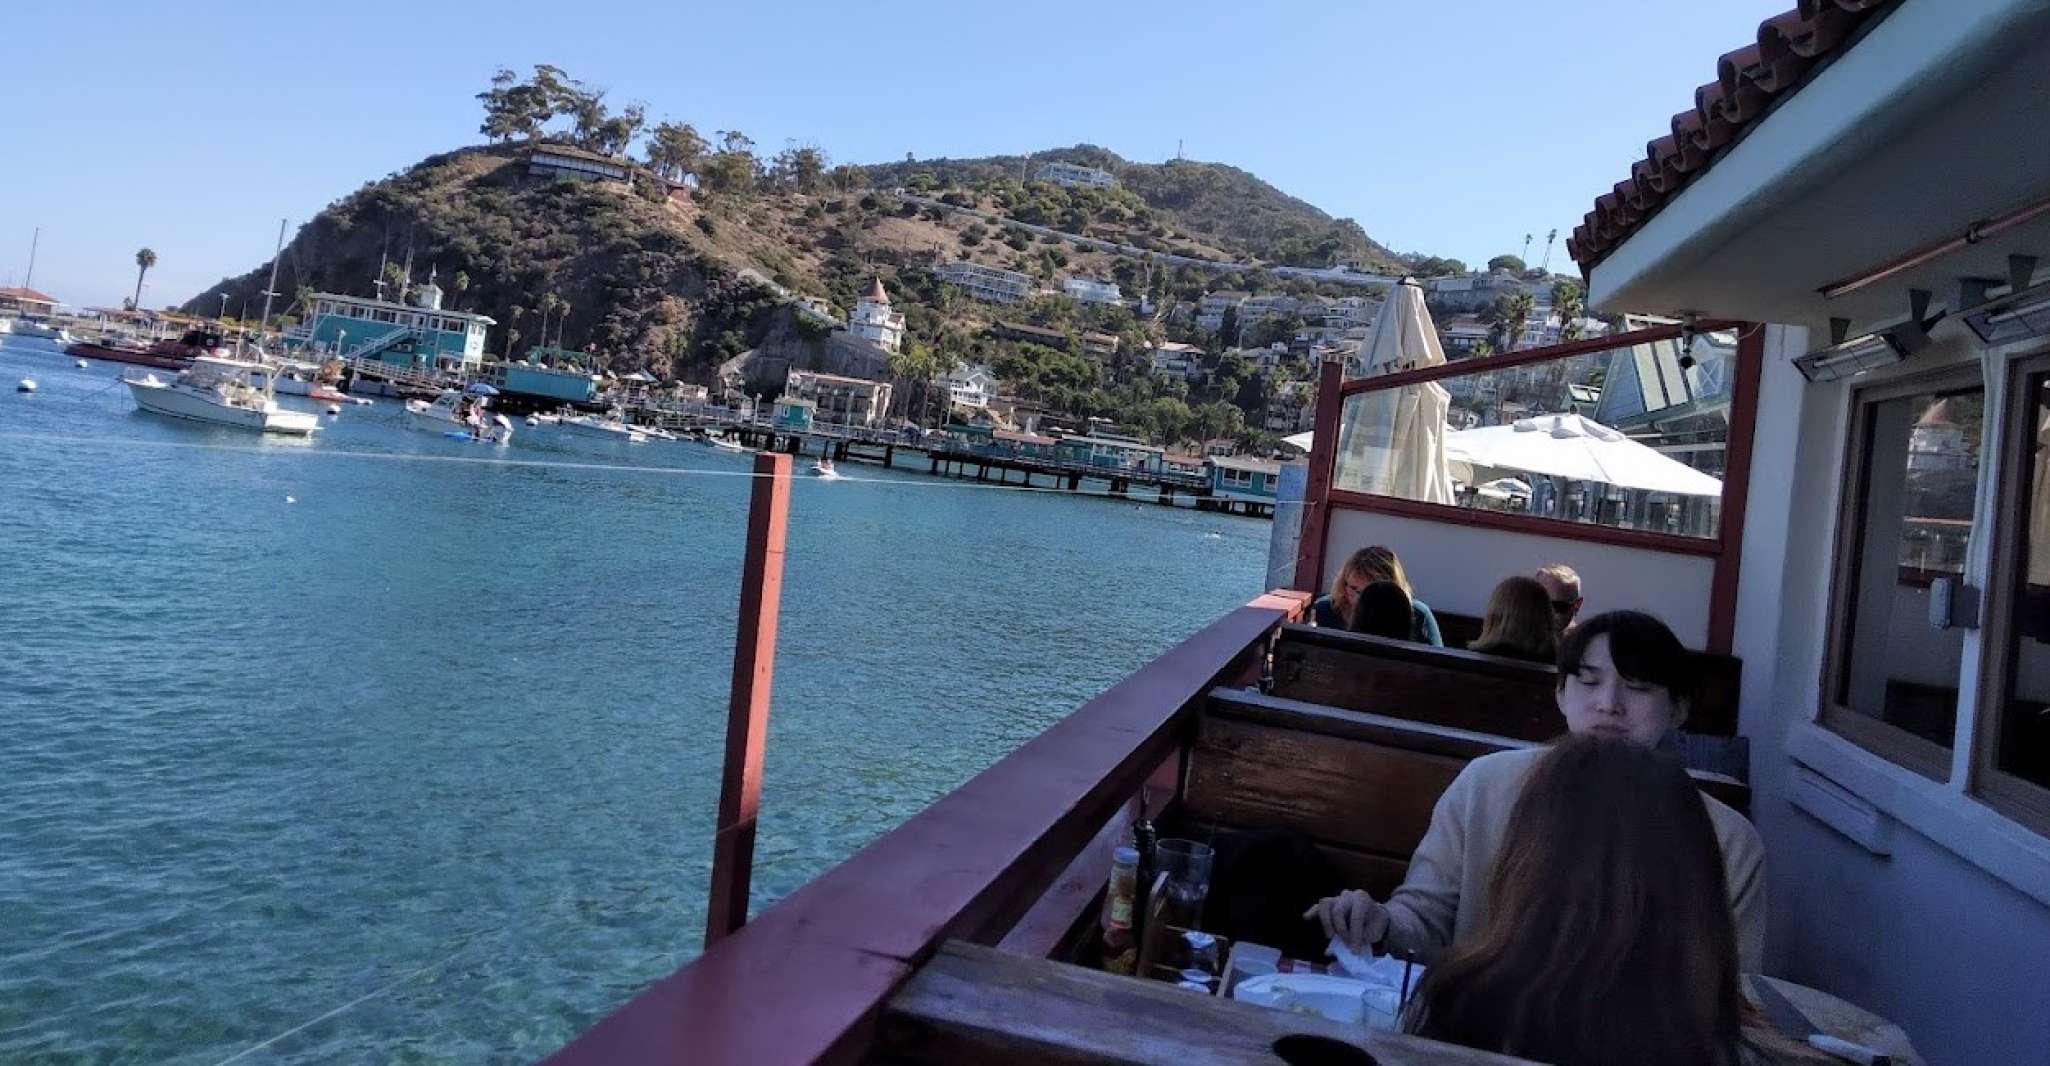 All-Inclusive Guided Tour of Catalina Island from Orange Co - Housity